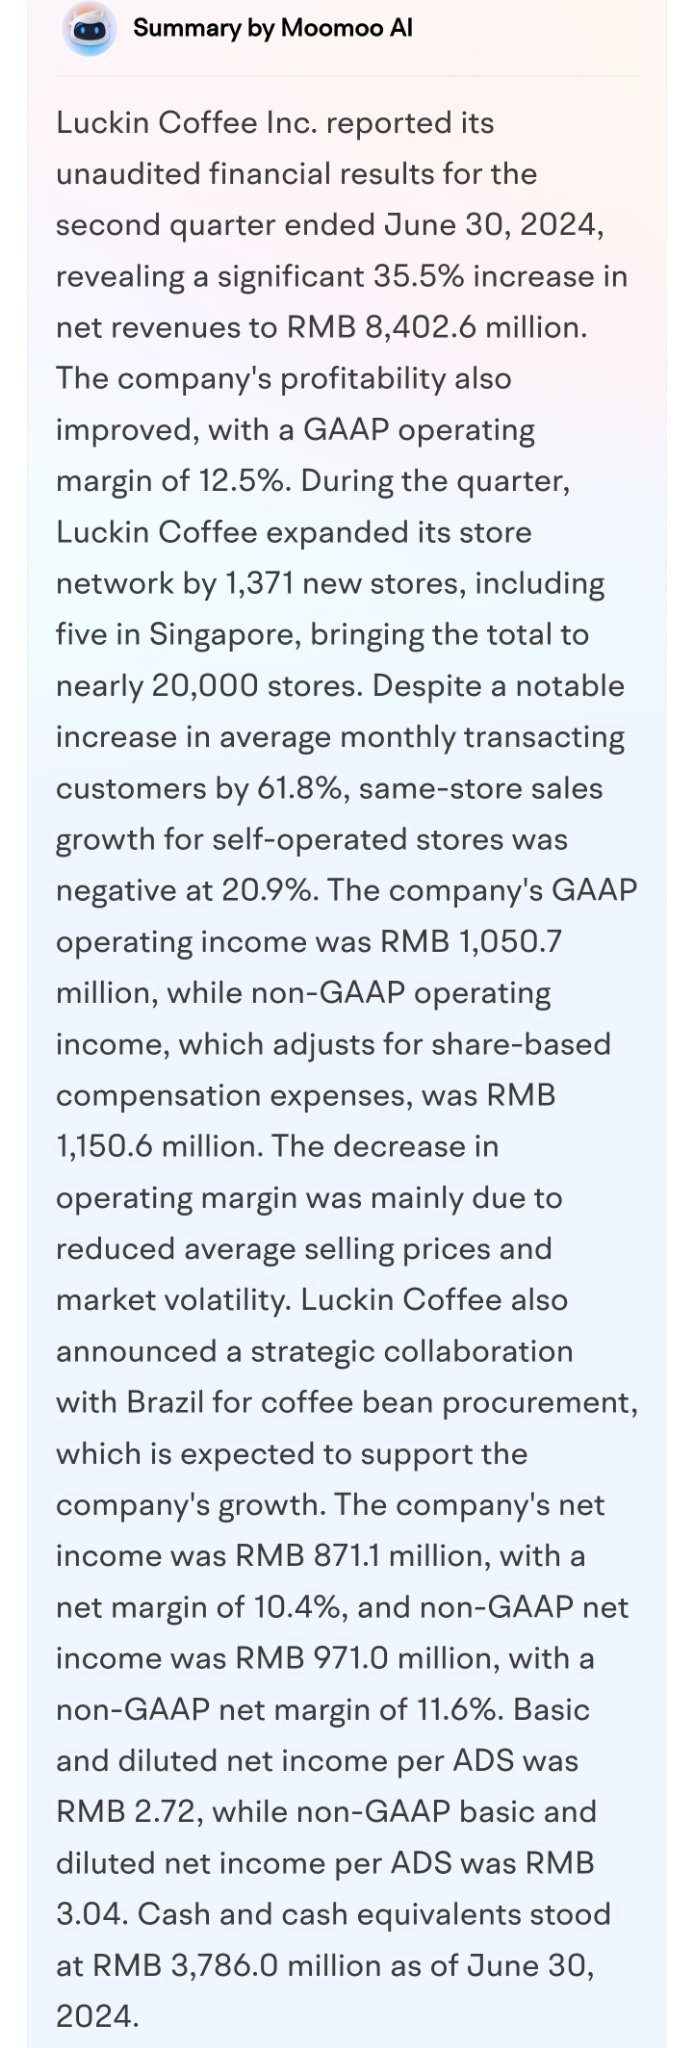 $Luckin Coffee (LKNCY.US)$ $Luckin Coffee (LKNCY.US)$ great earnings and outlook, I hope Nasdaq relisting will come soon. Then we're gong back to the moon 🌙